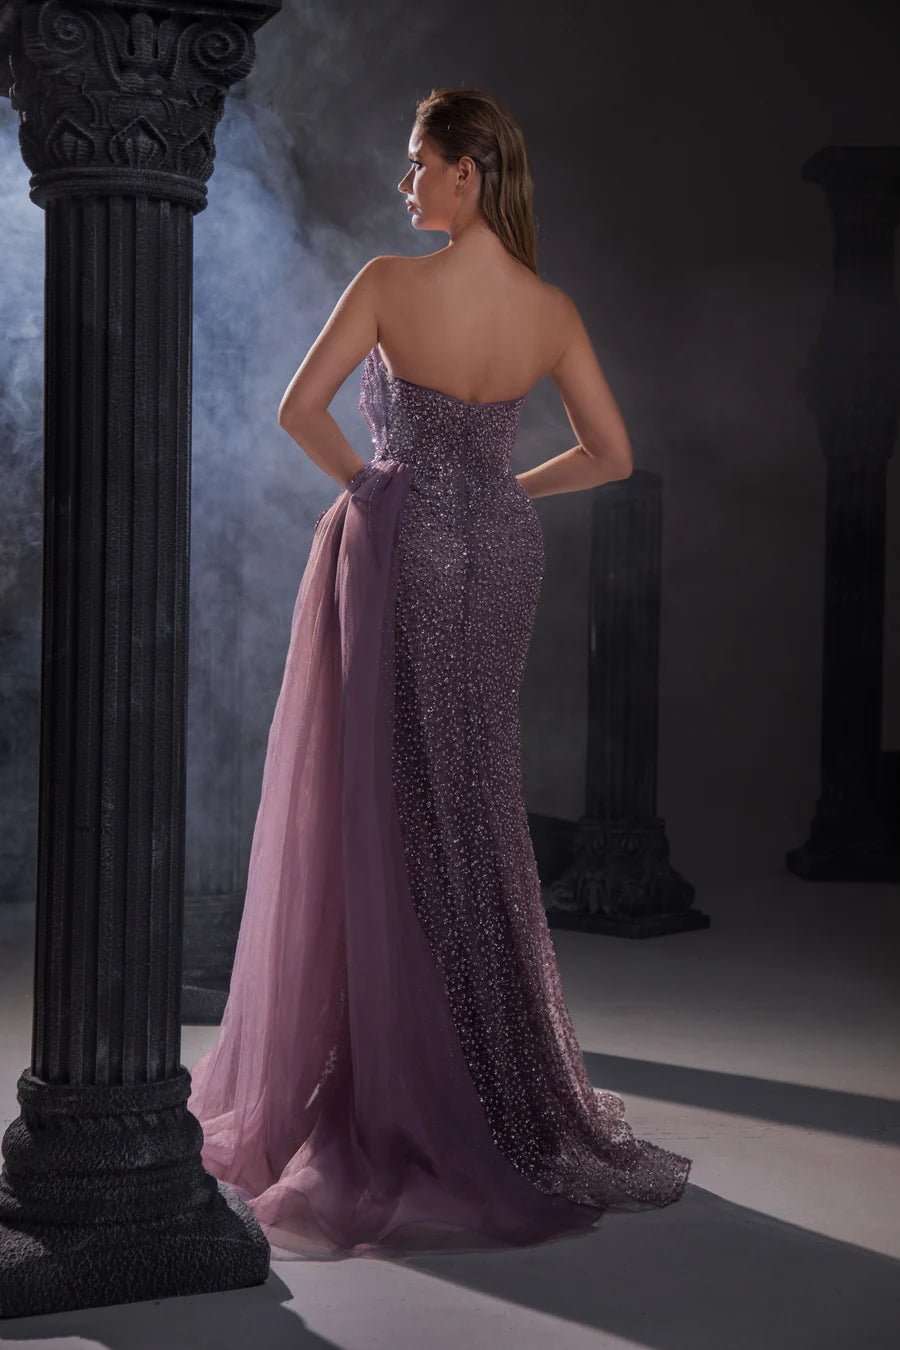 Gothic Mauve Sequin Evening Gown with Strapless Design and Tulle Train - Designer Sequin Gown and Strapless Glitter Dress Plus Size - WonderlandByLilian